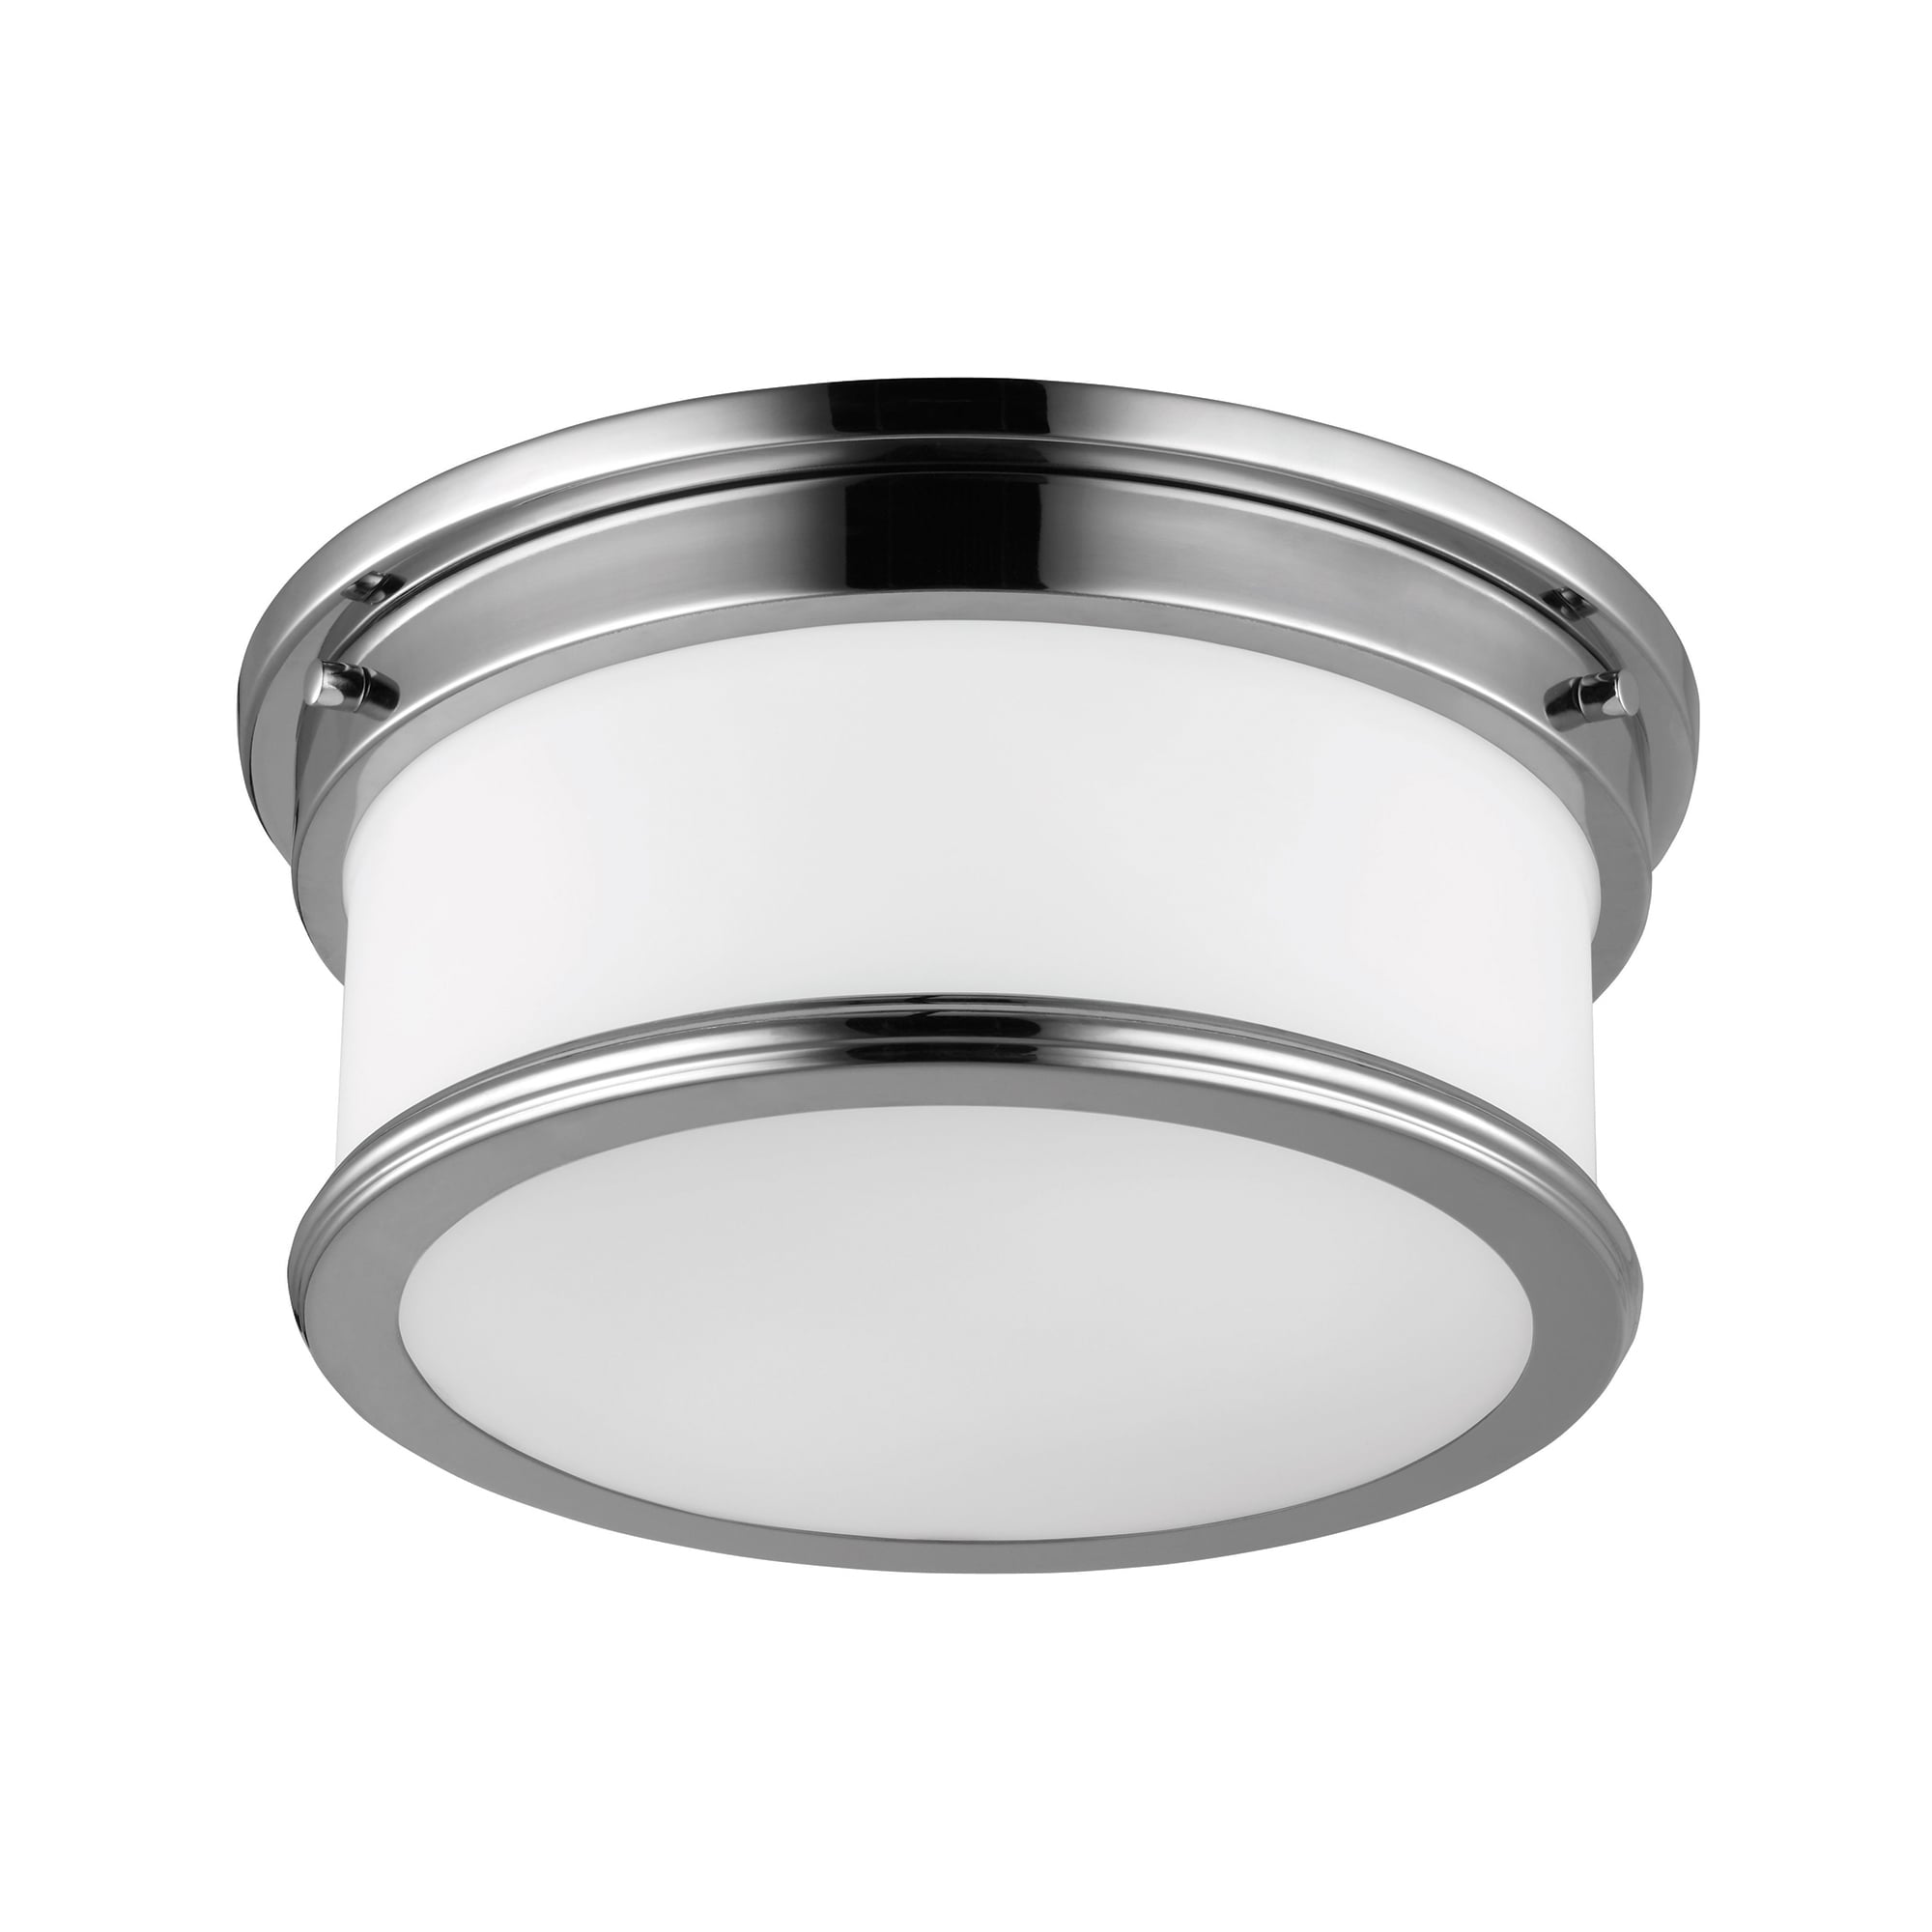 Modern Bathroom Ceiling Light in Nickel with Frost Glass